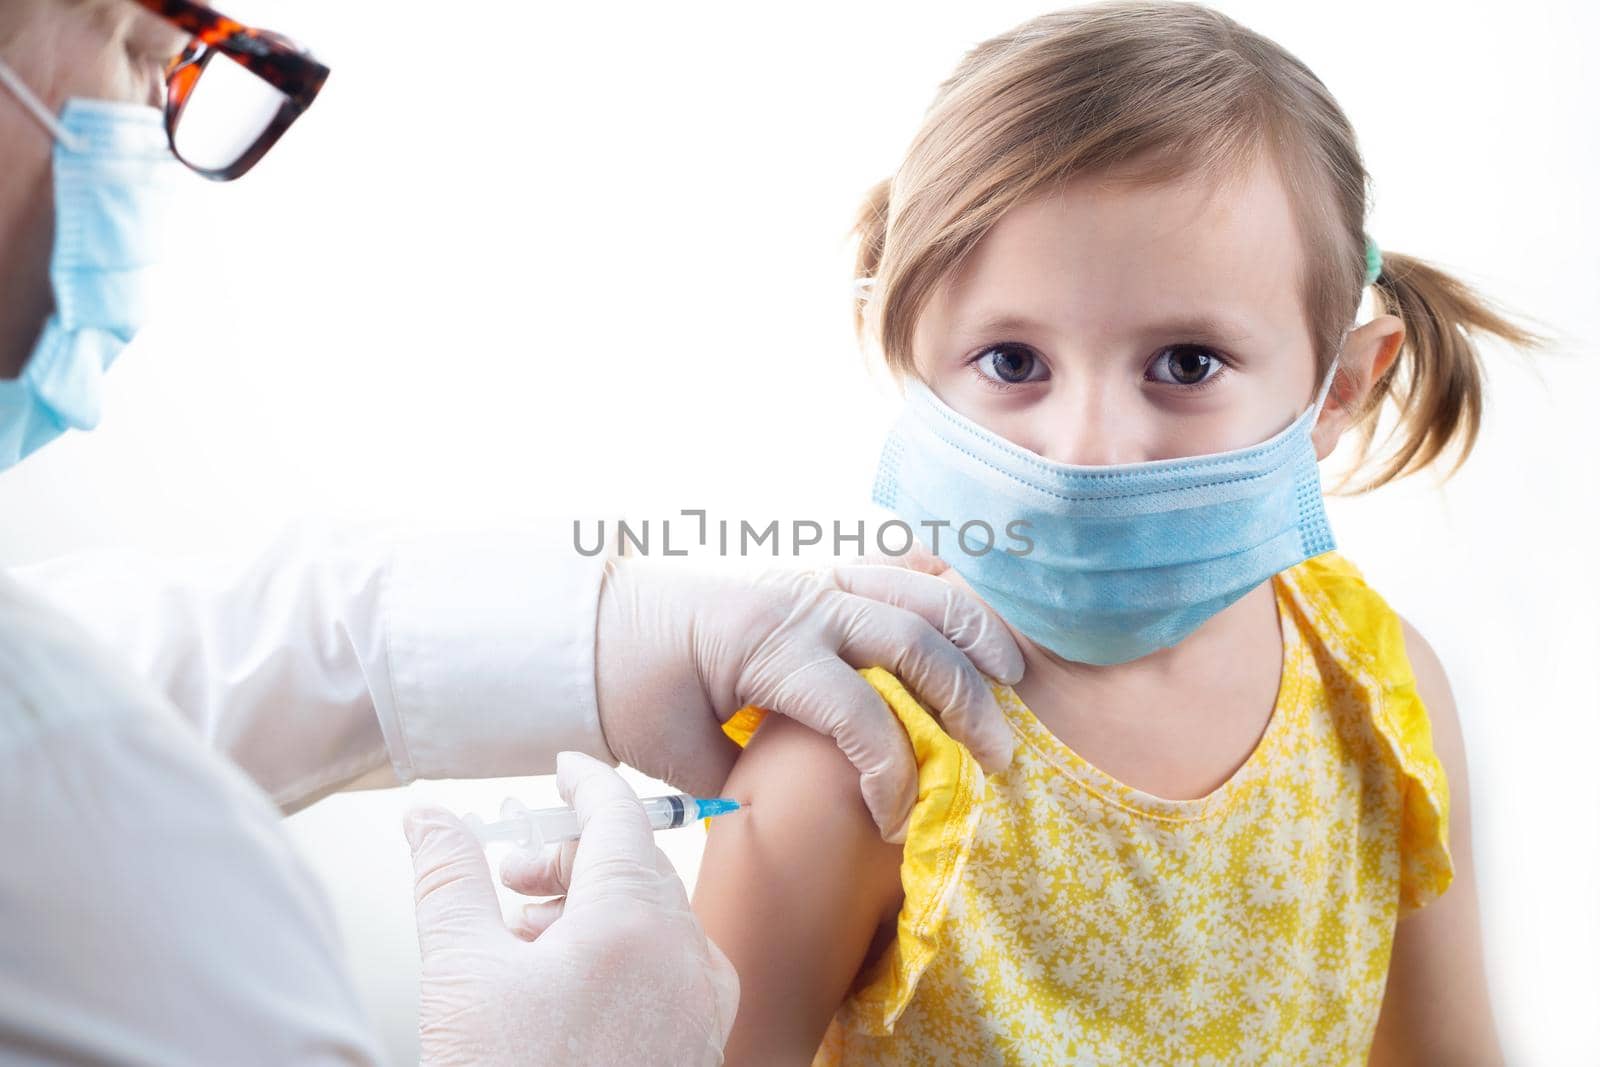 Vaccination concept in the era of coronavirus. Woman Doctor vaccinating cute little girl wearing yellow dress and facial protective mask on white background.